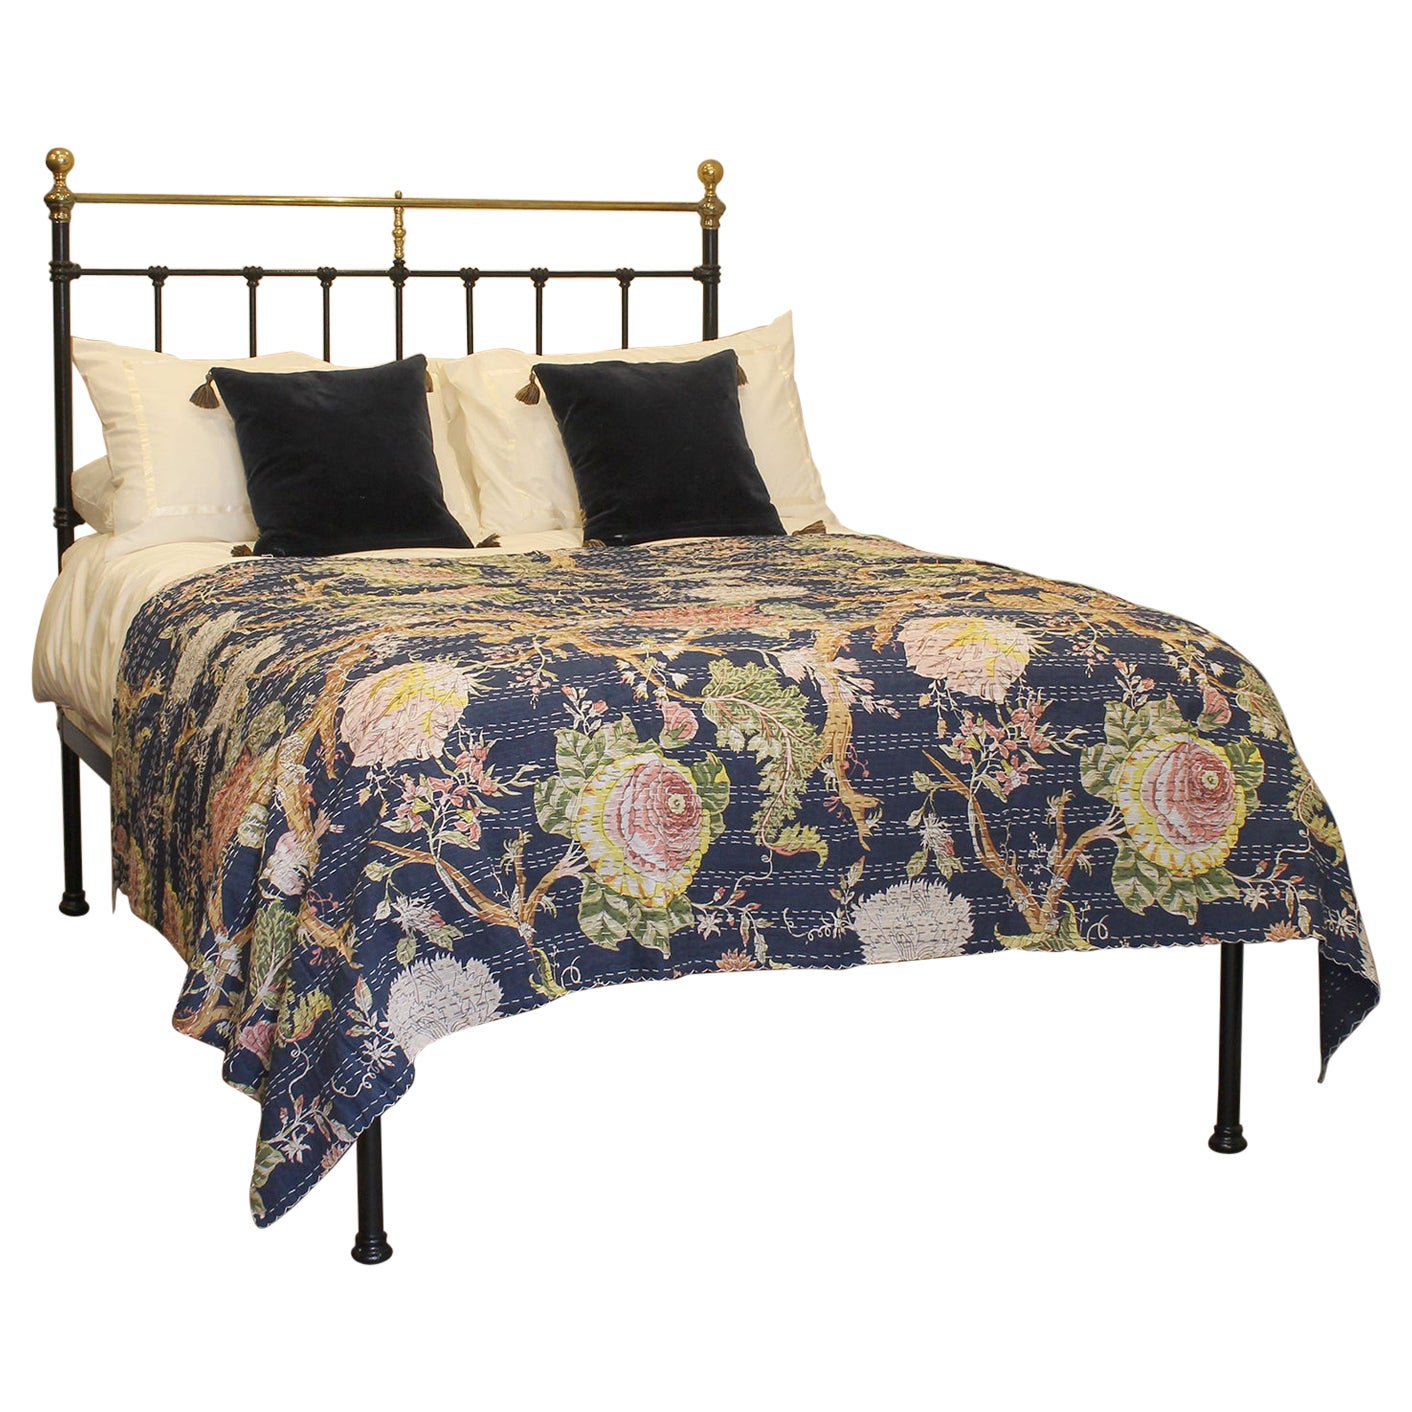 Double Brass and Iron Platform Antique Bed in Black MD146